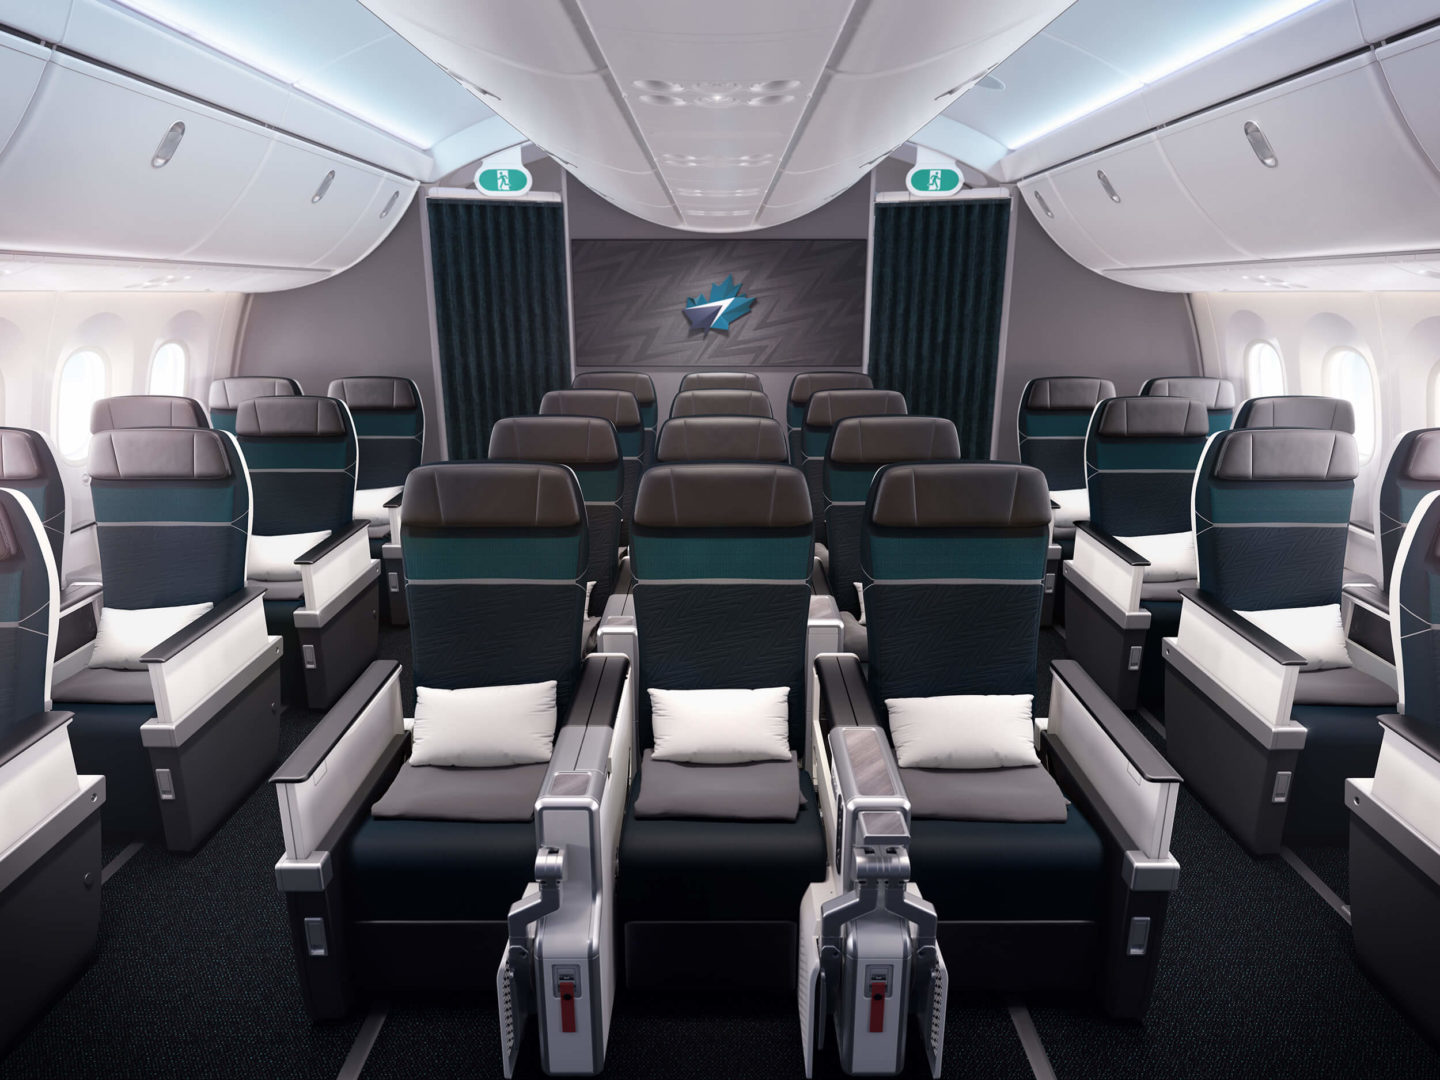 Full cabin view of Premium Economy Class onboard WestJet's B787 aircraft